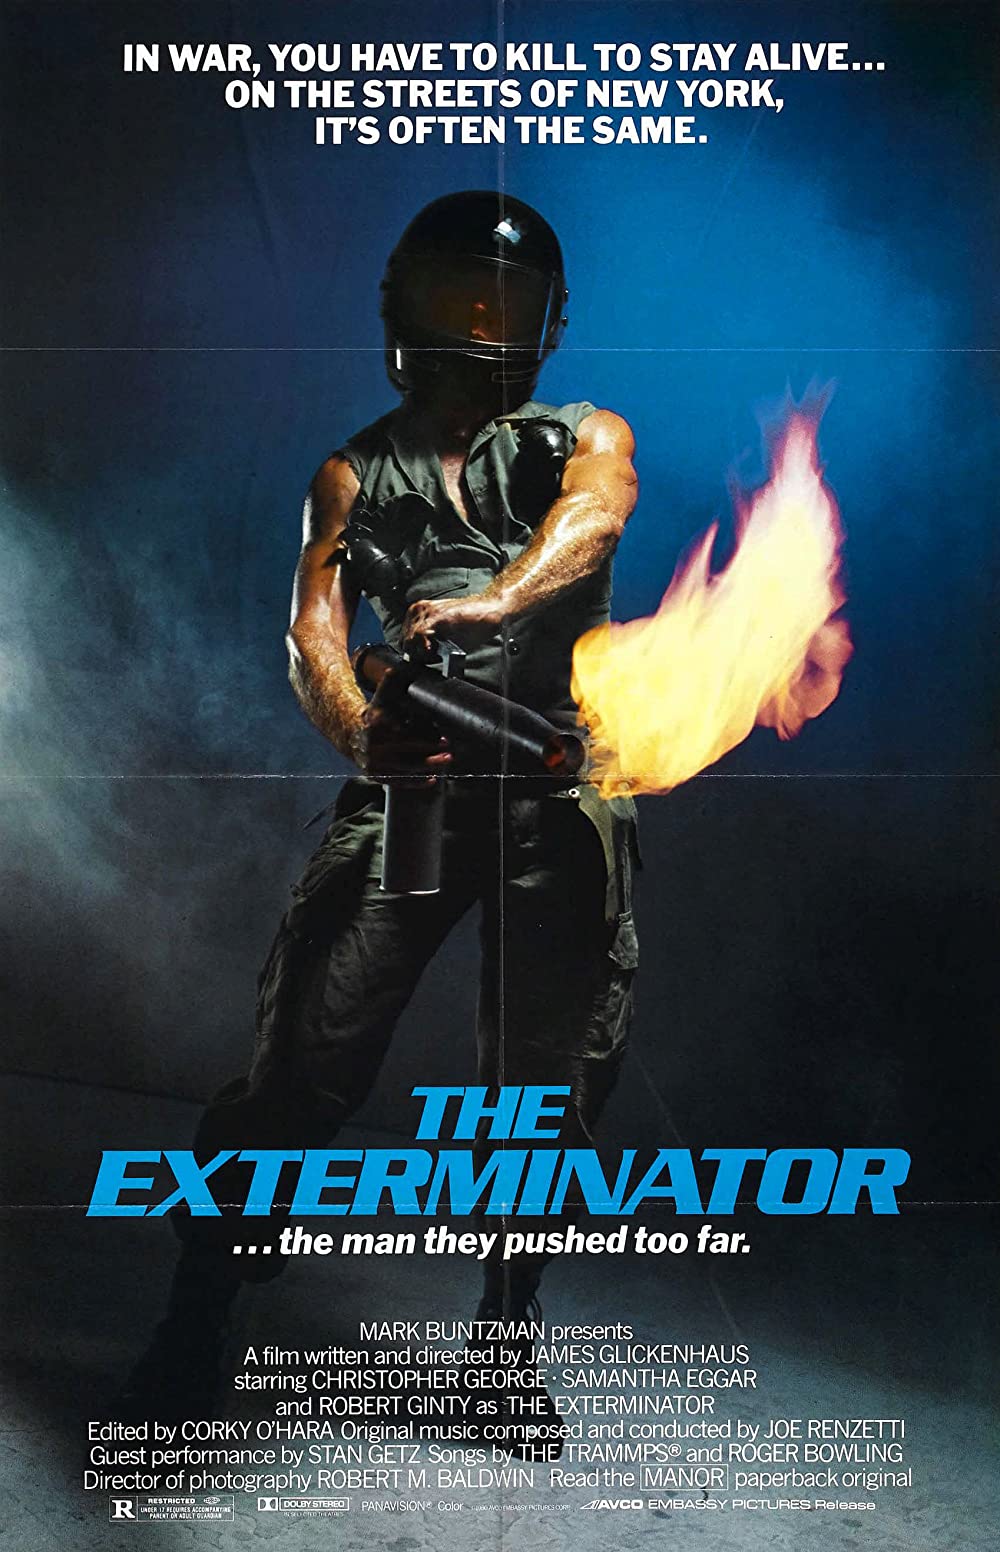 Fucked-Up Films #1: The Exterminator (1980)